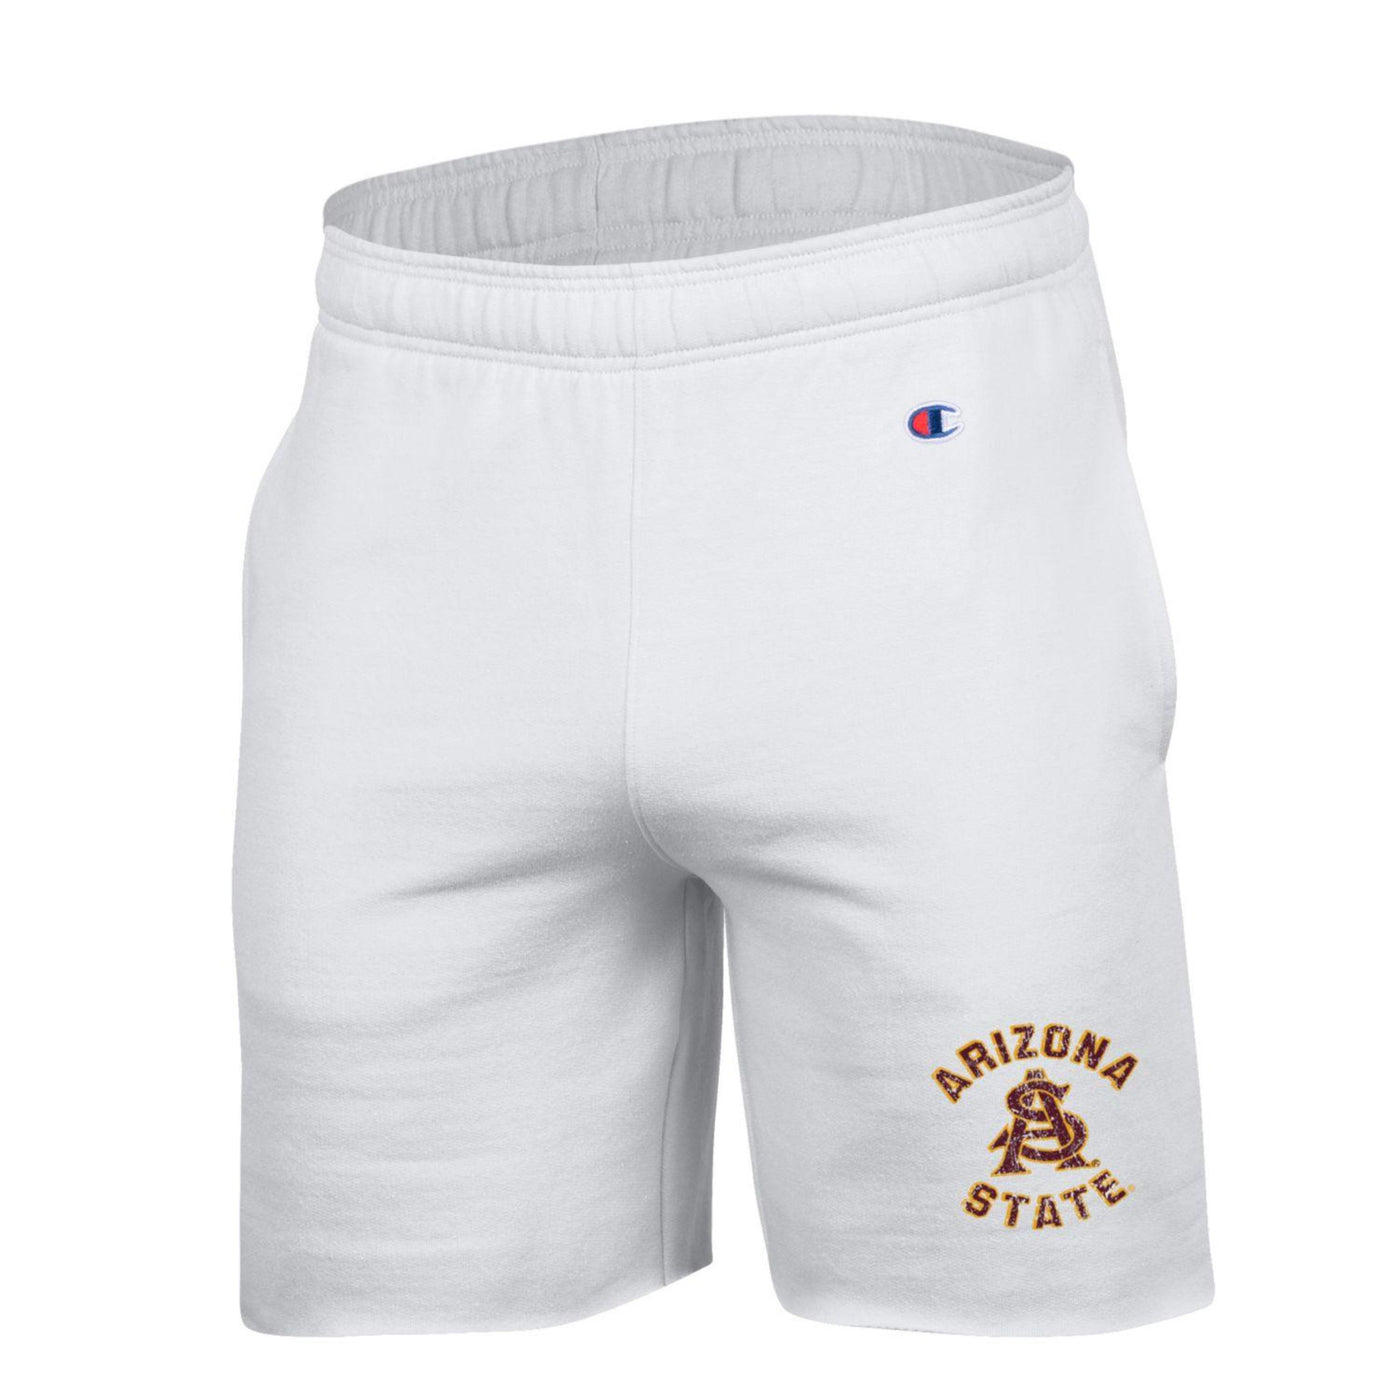 ASU white fleece Champion shorts with Arizona State lettering around an interlocking 'A' and 'S'